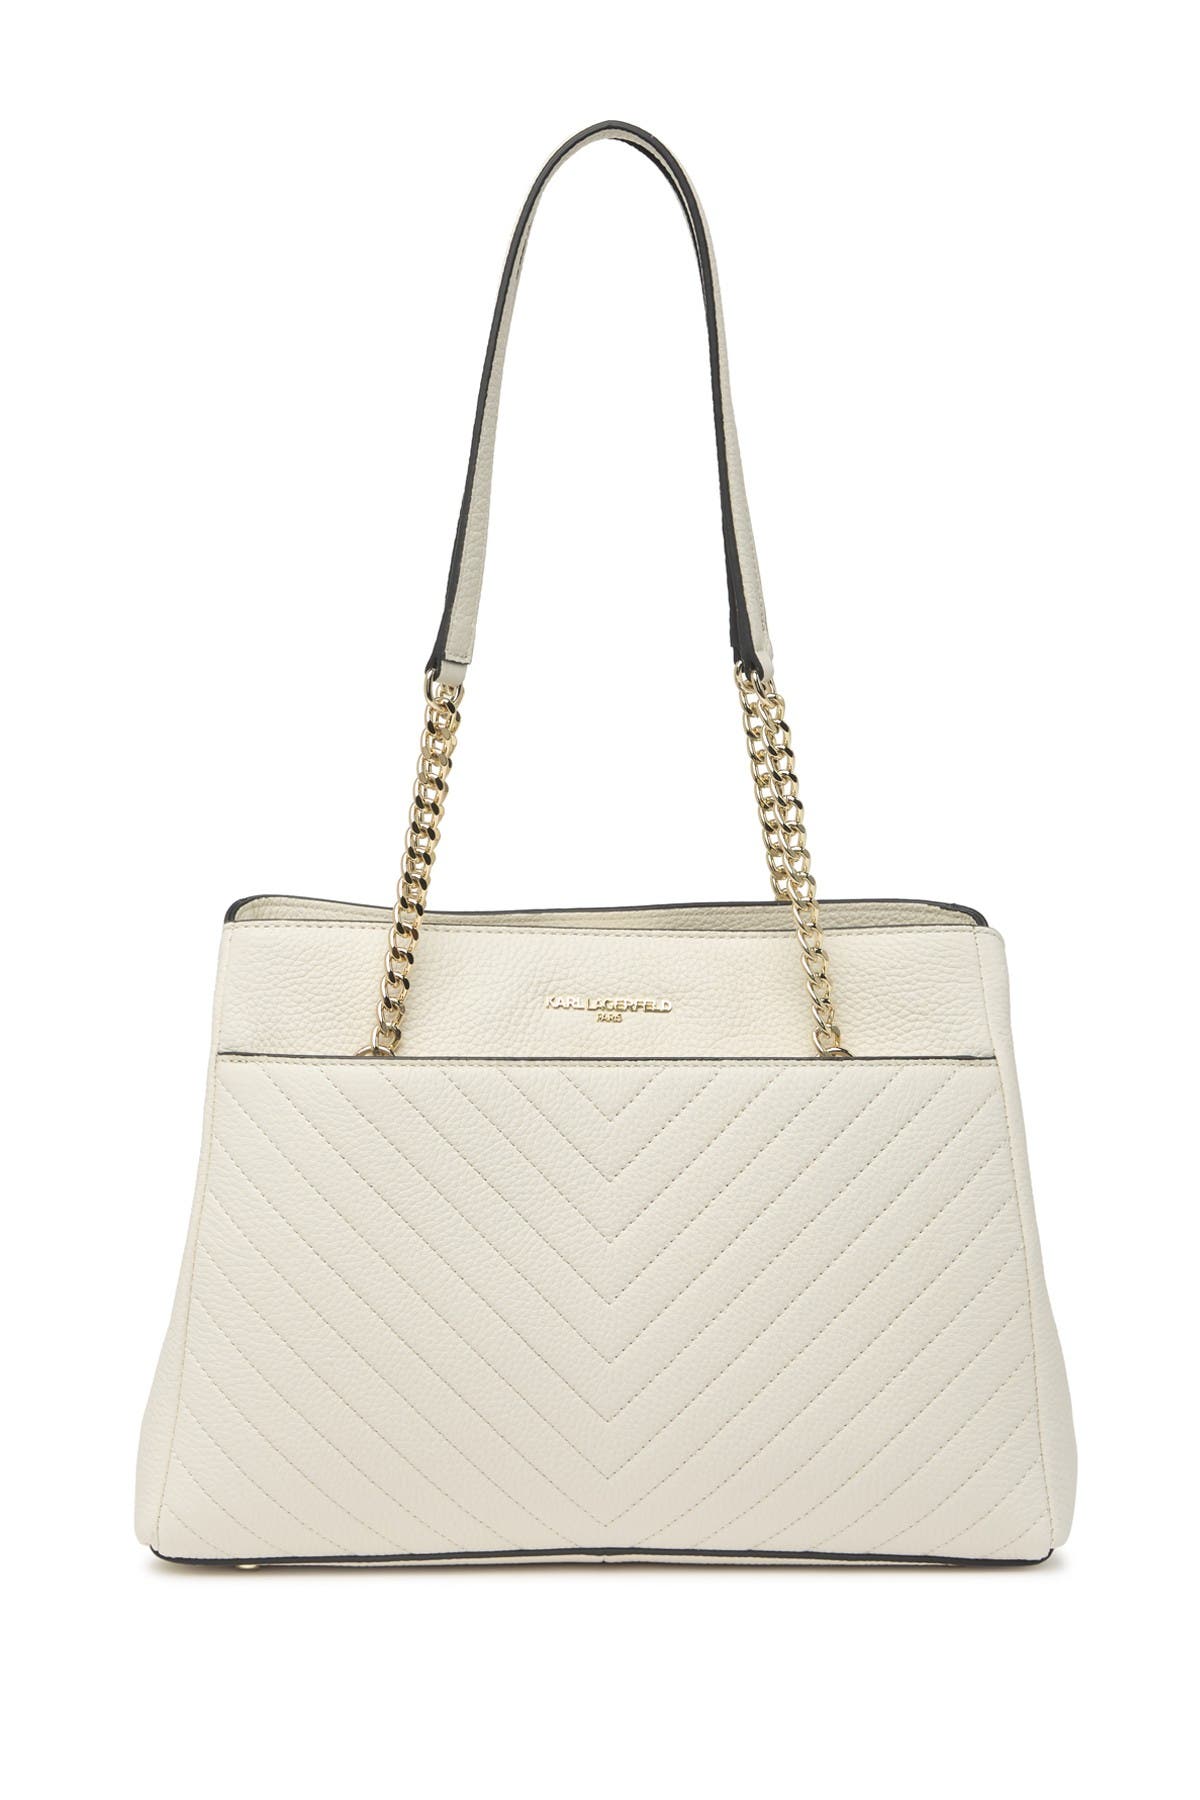 Karl Lagerfeld Charlotte Leather Tote Bag In Winter Whi